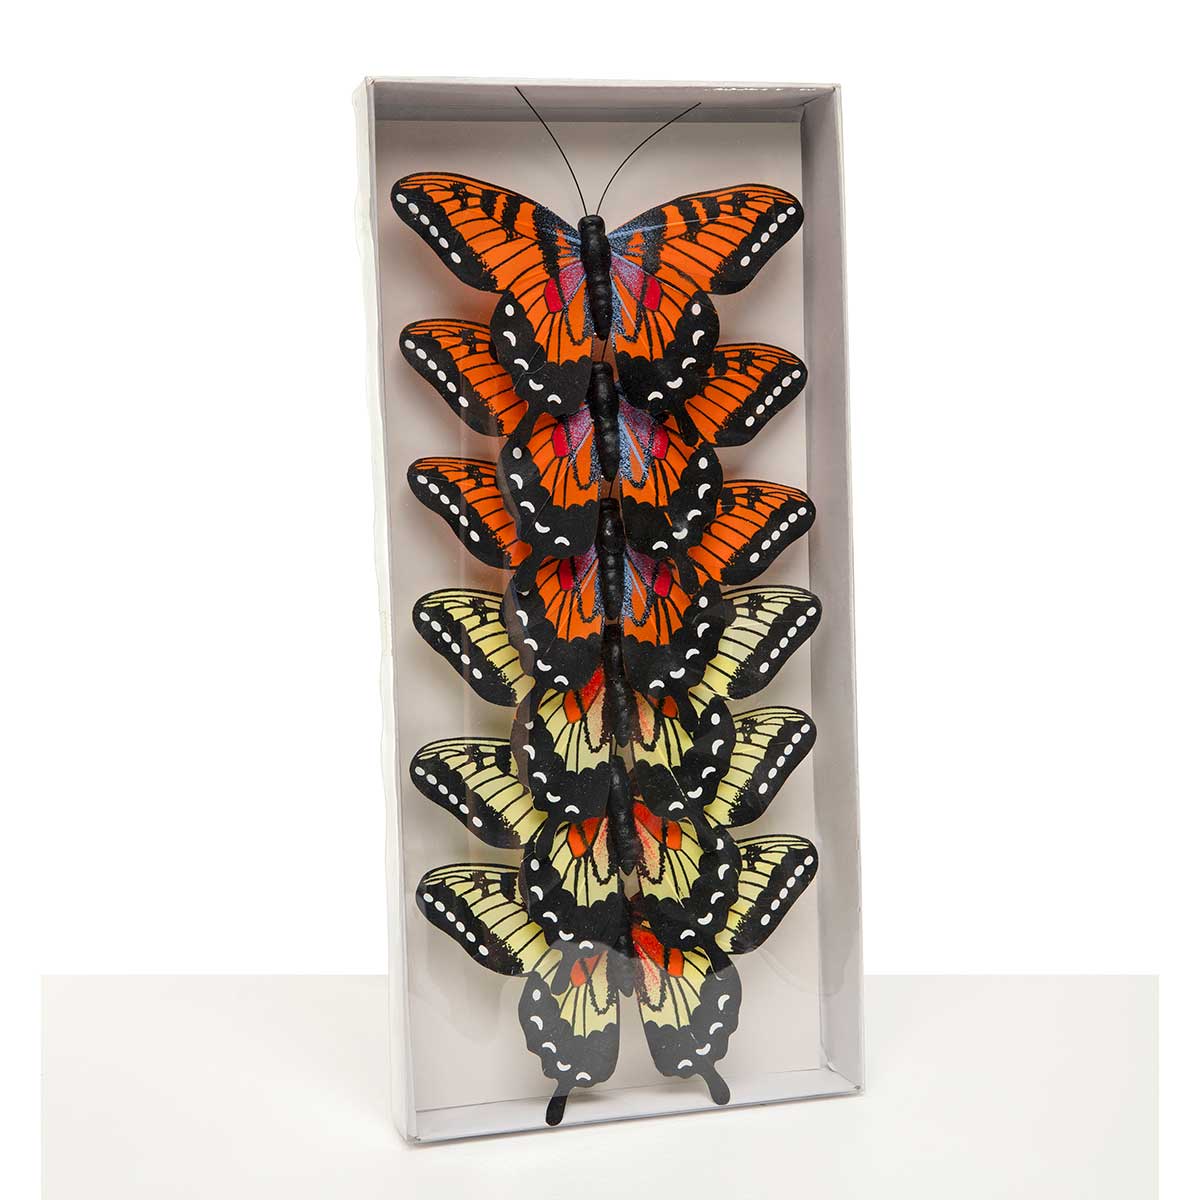 BUTTERFLY 2 ASSORTED YE/OR LARGE 5IN X 5.5IN ON METAL CLIP